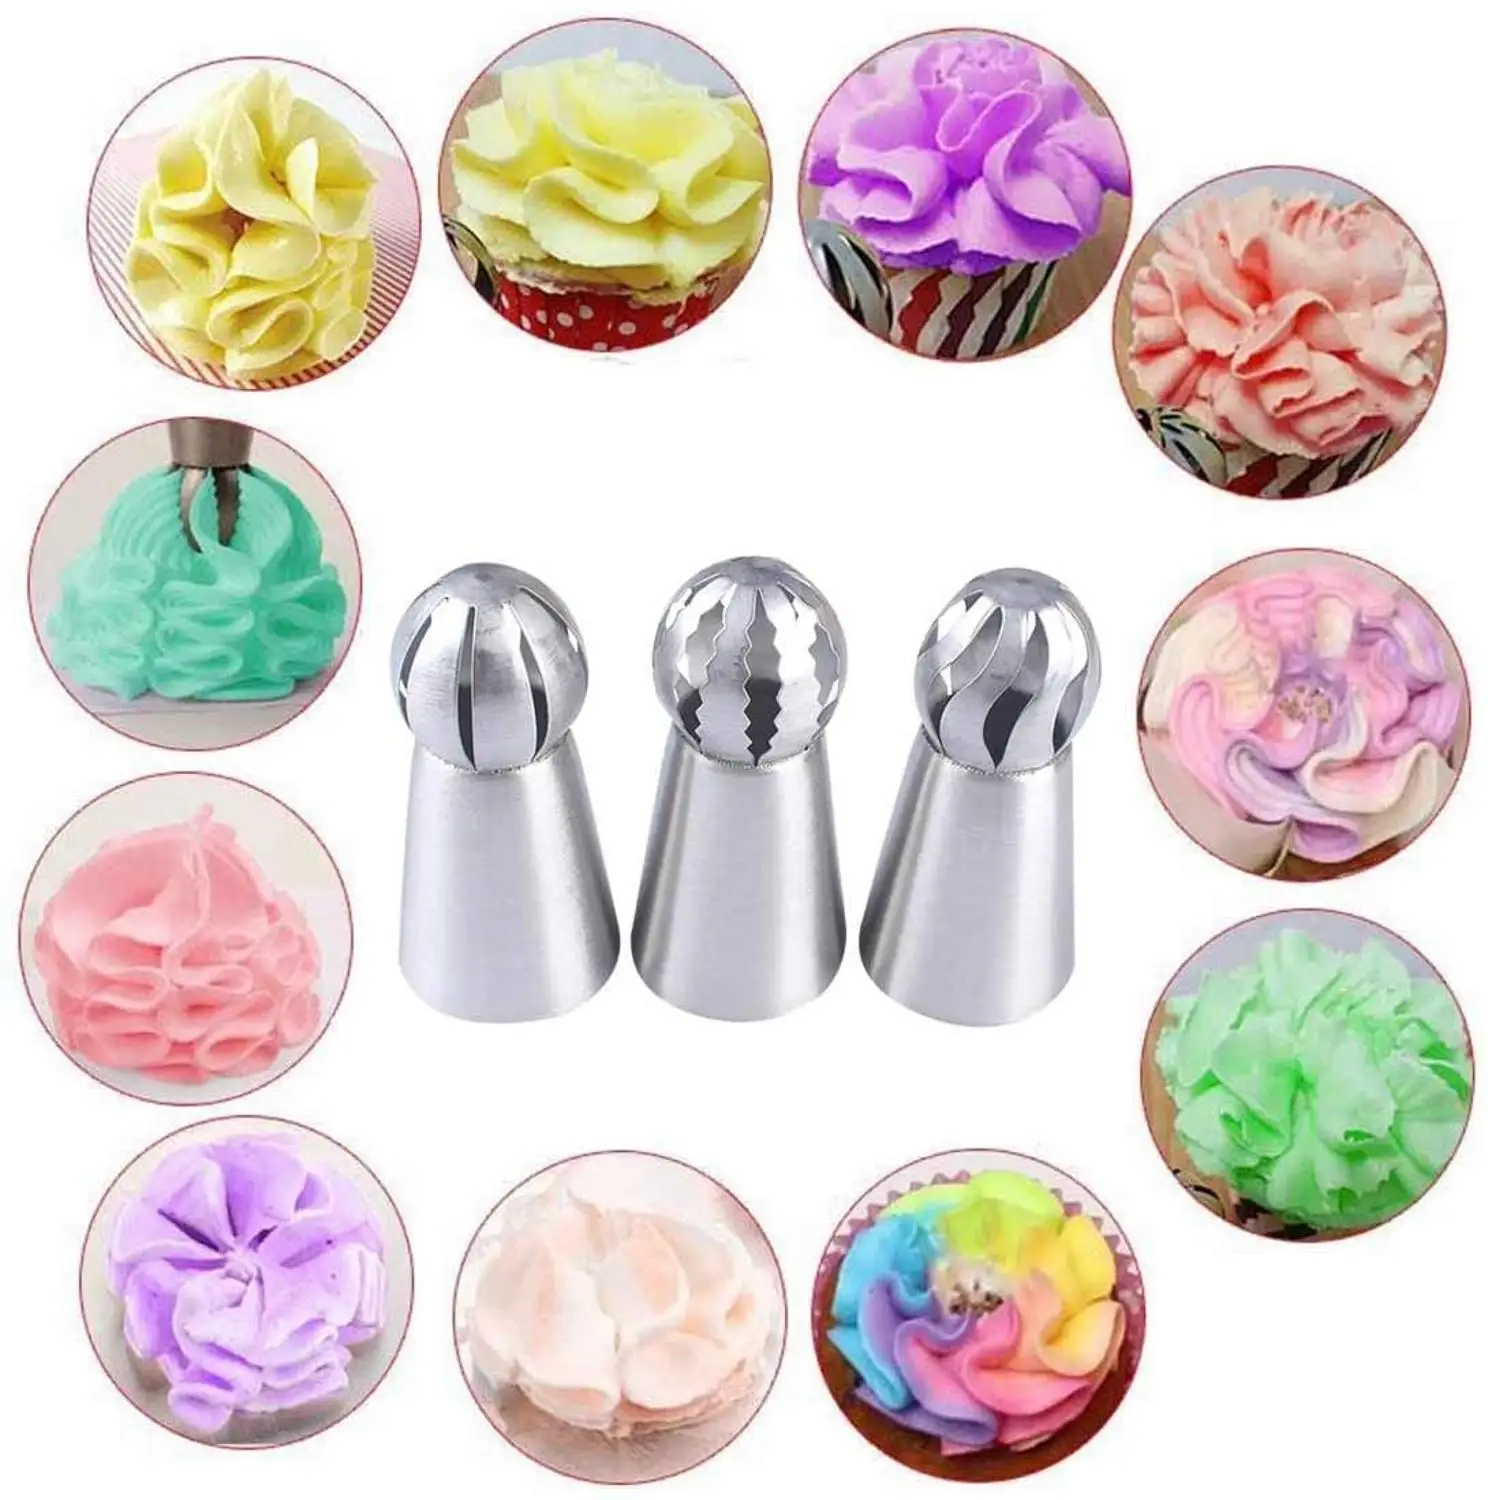 Cupcake Stainless Steel Sphere Ball Shape Icing Piping Nozzles Pastry Cream Tips Flower Torch Pastry Tube Decoration